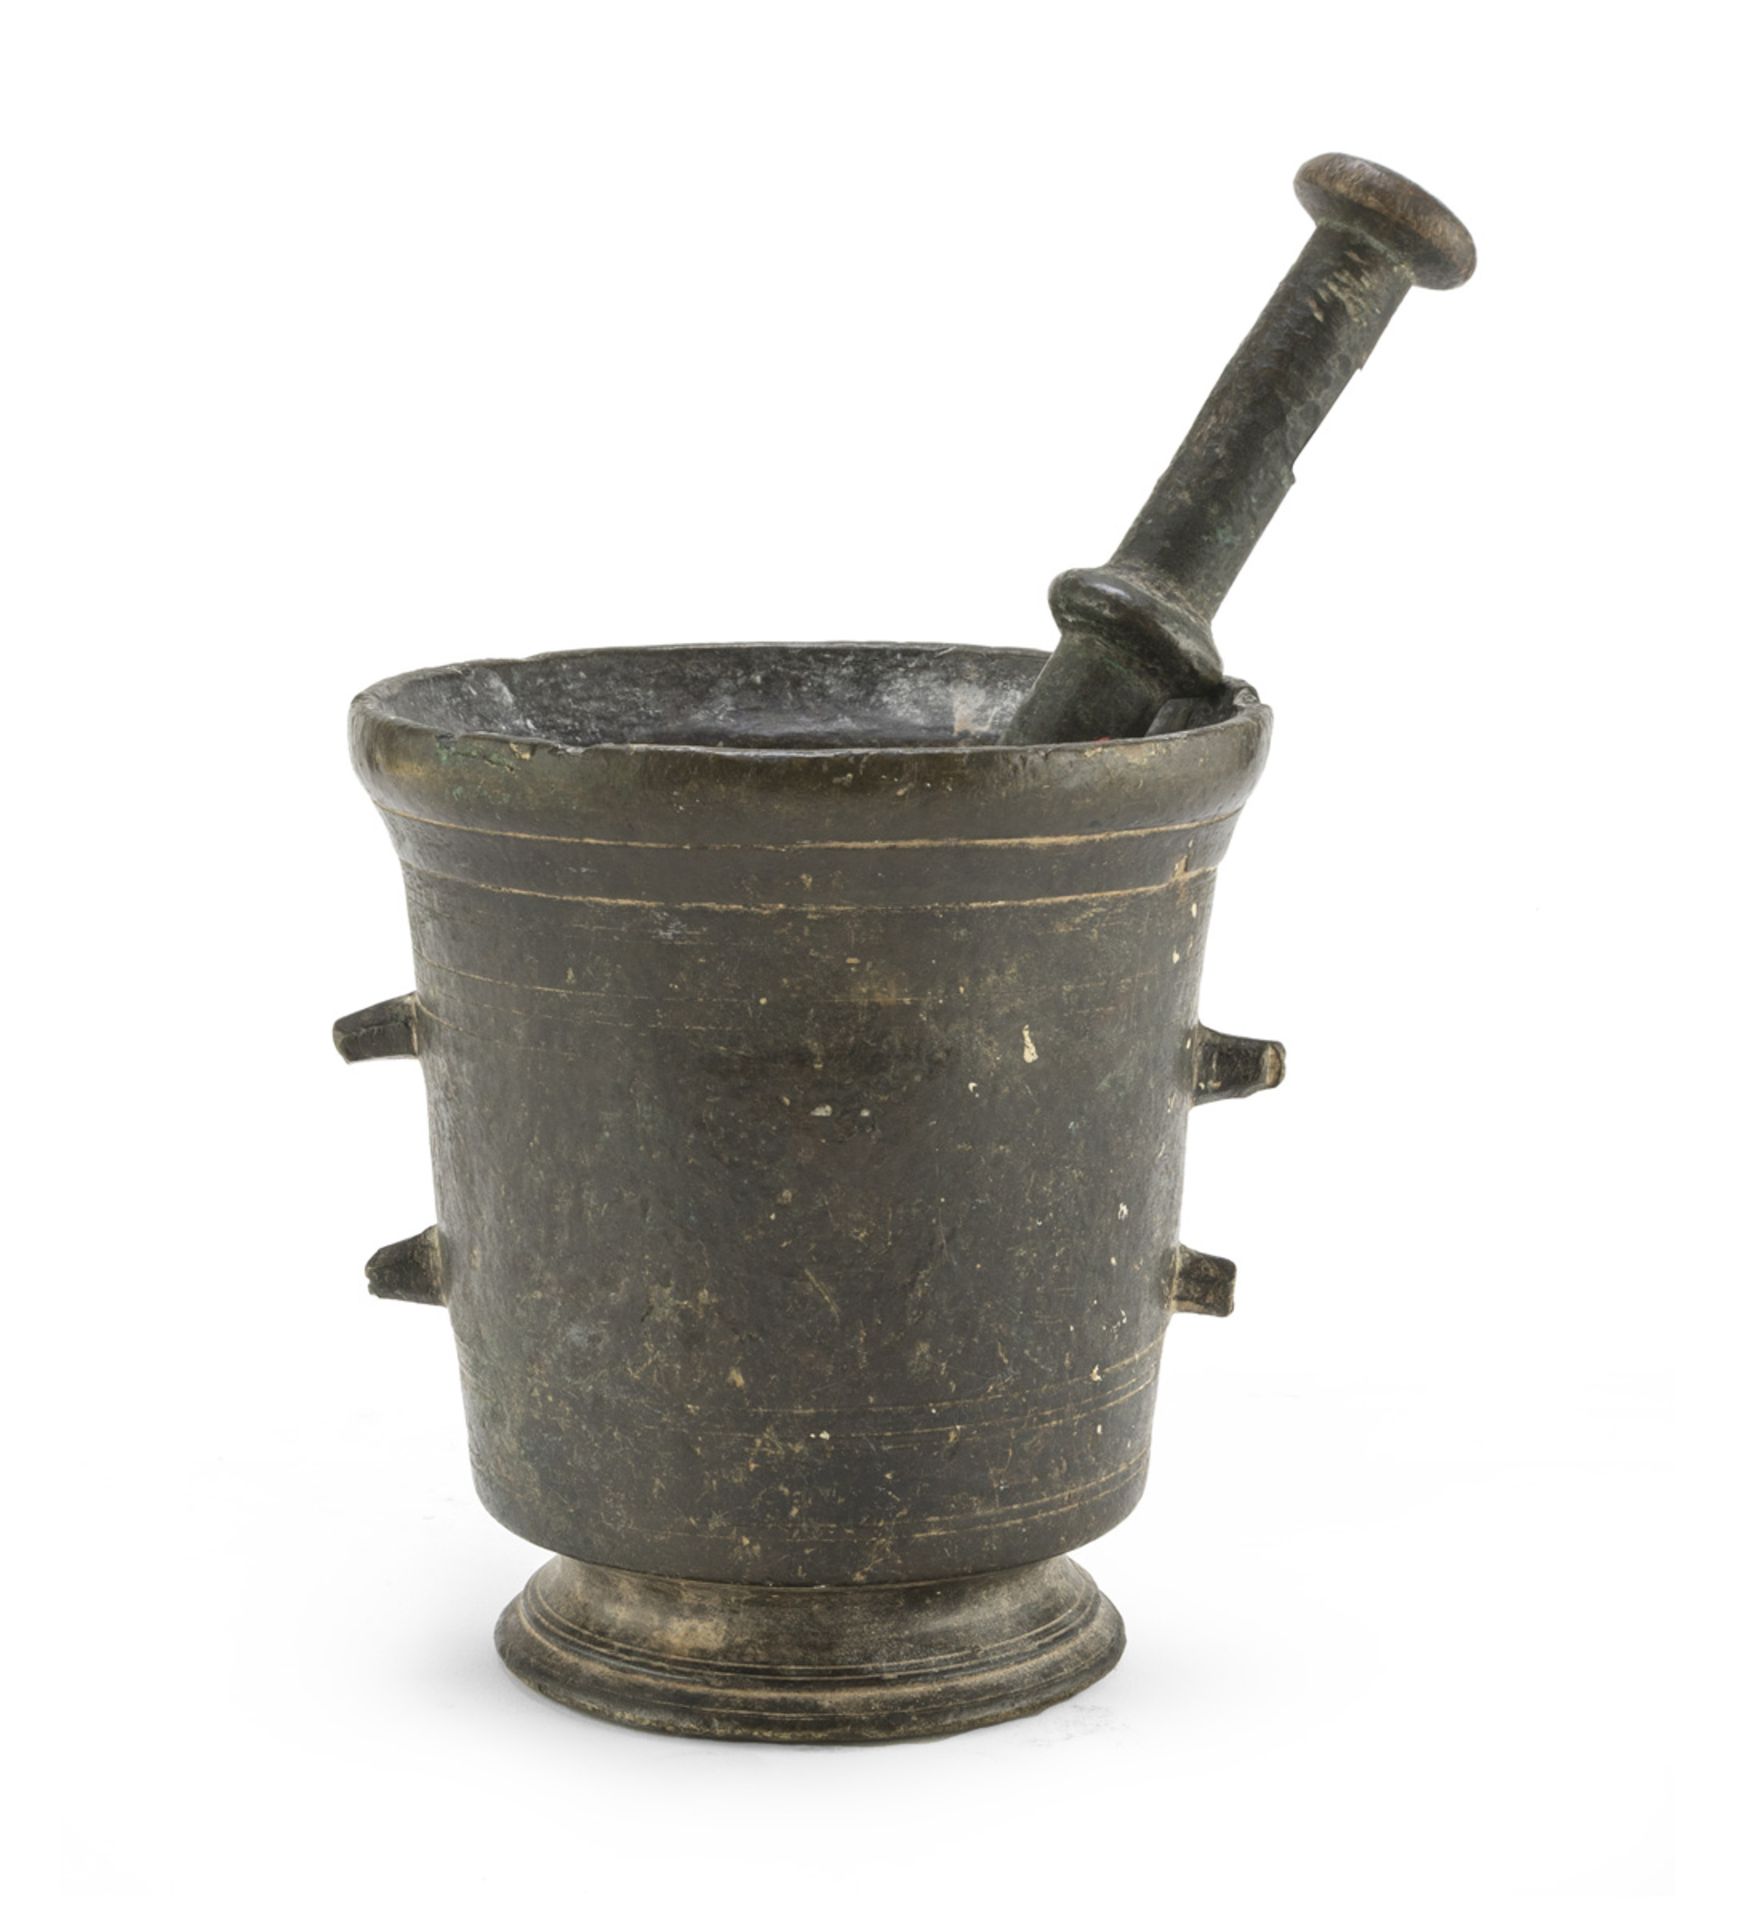 BIG MORTAR WITH PESTLE IN BRONZE 16TH CENTURY